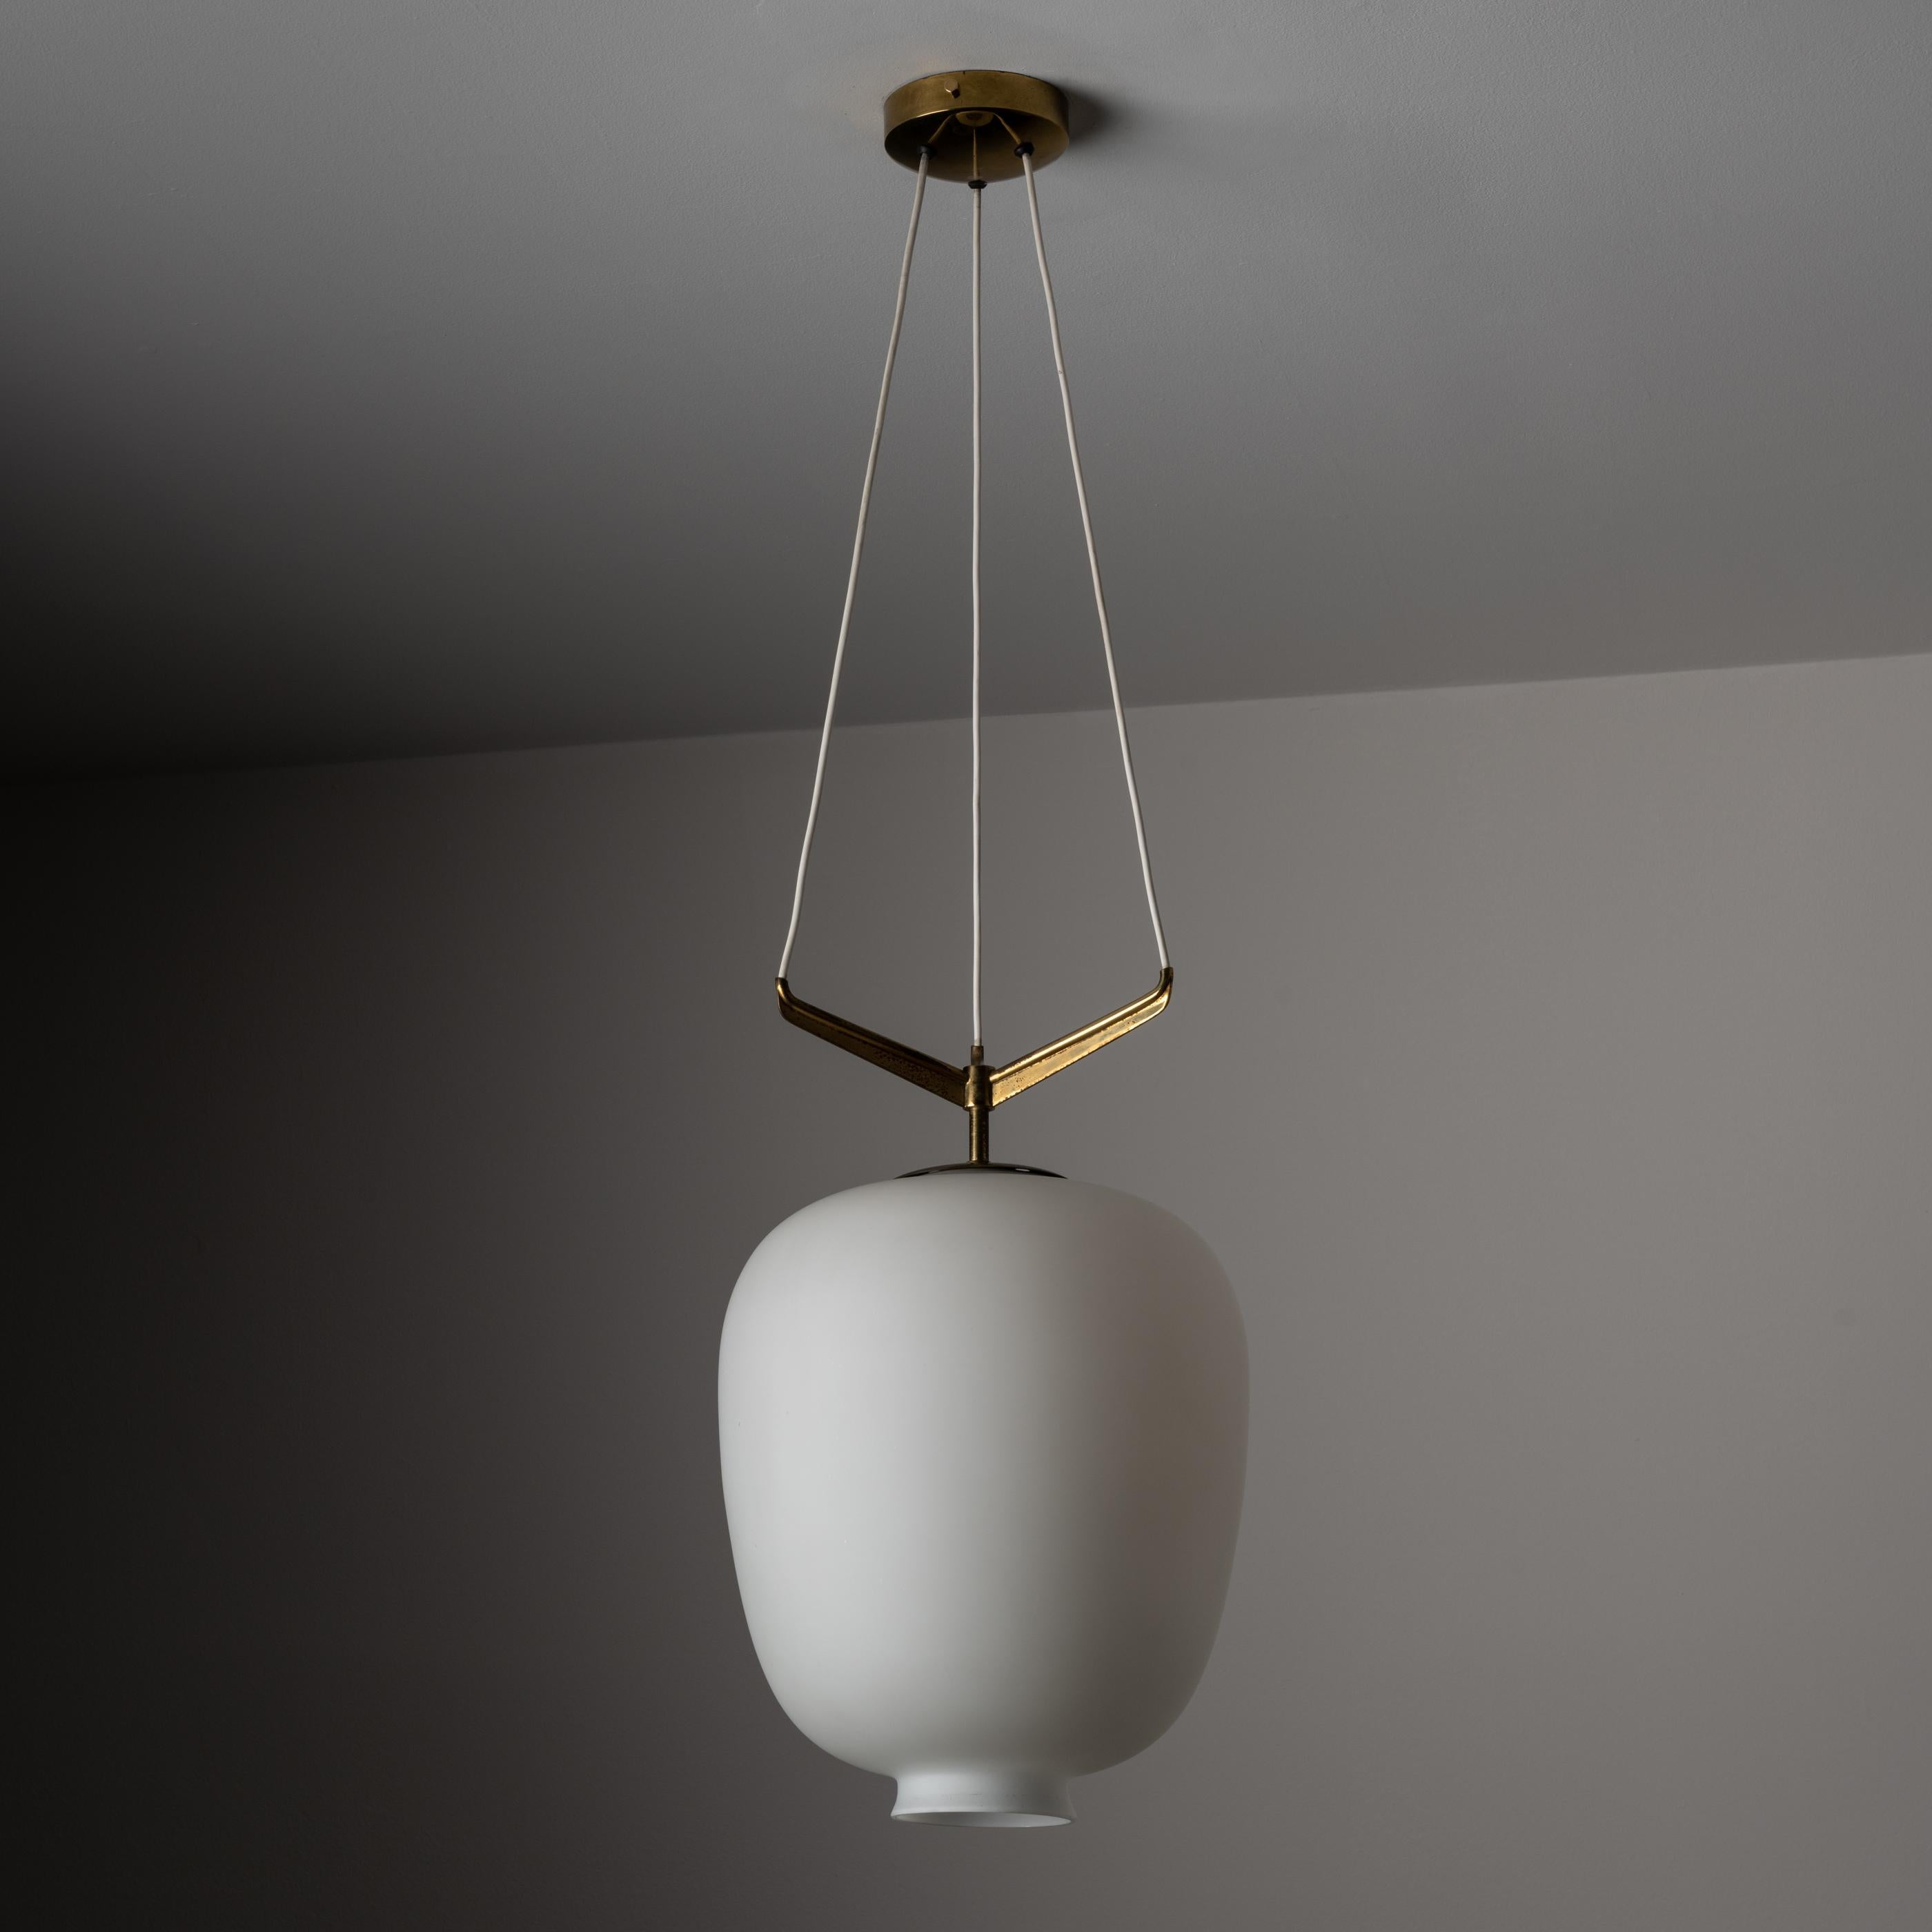 Suspension light by Stilnovo. Manufactured in Italy, circa the 1950s. Features a large frosted glass shade and brass suspension armature. Polished brass arms are naturally aged. Original Stilnovo sticker on base armature. Rewired for U.S. standards.